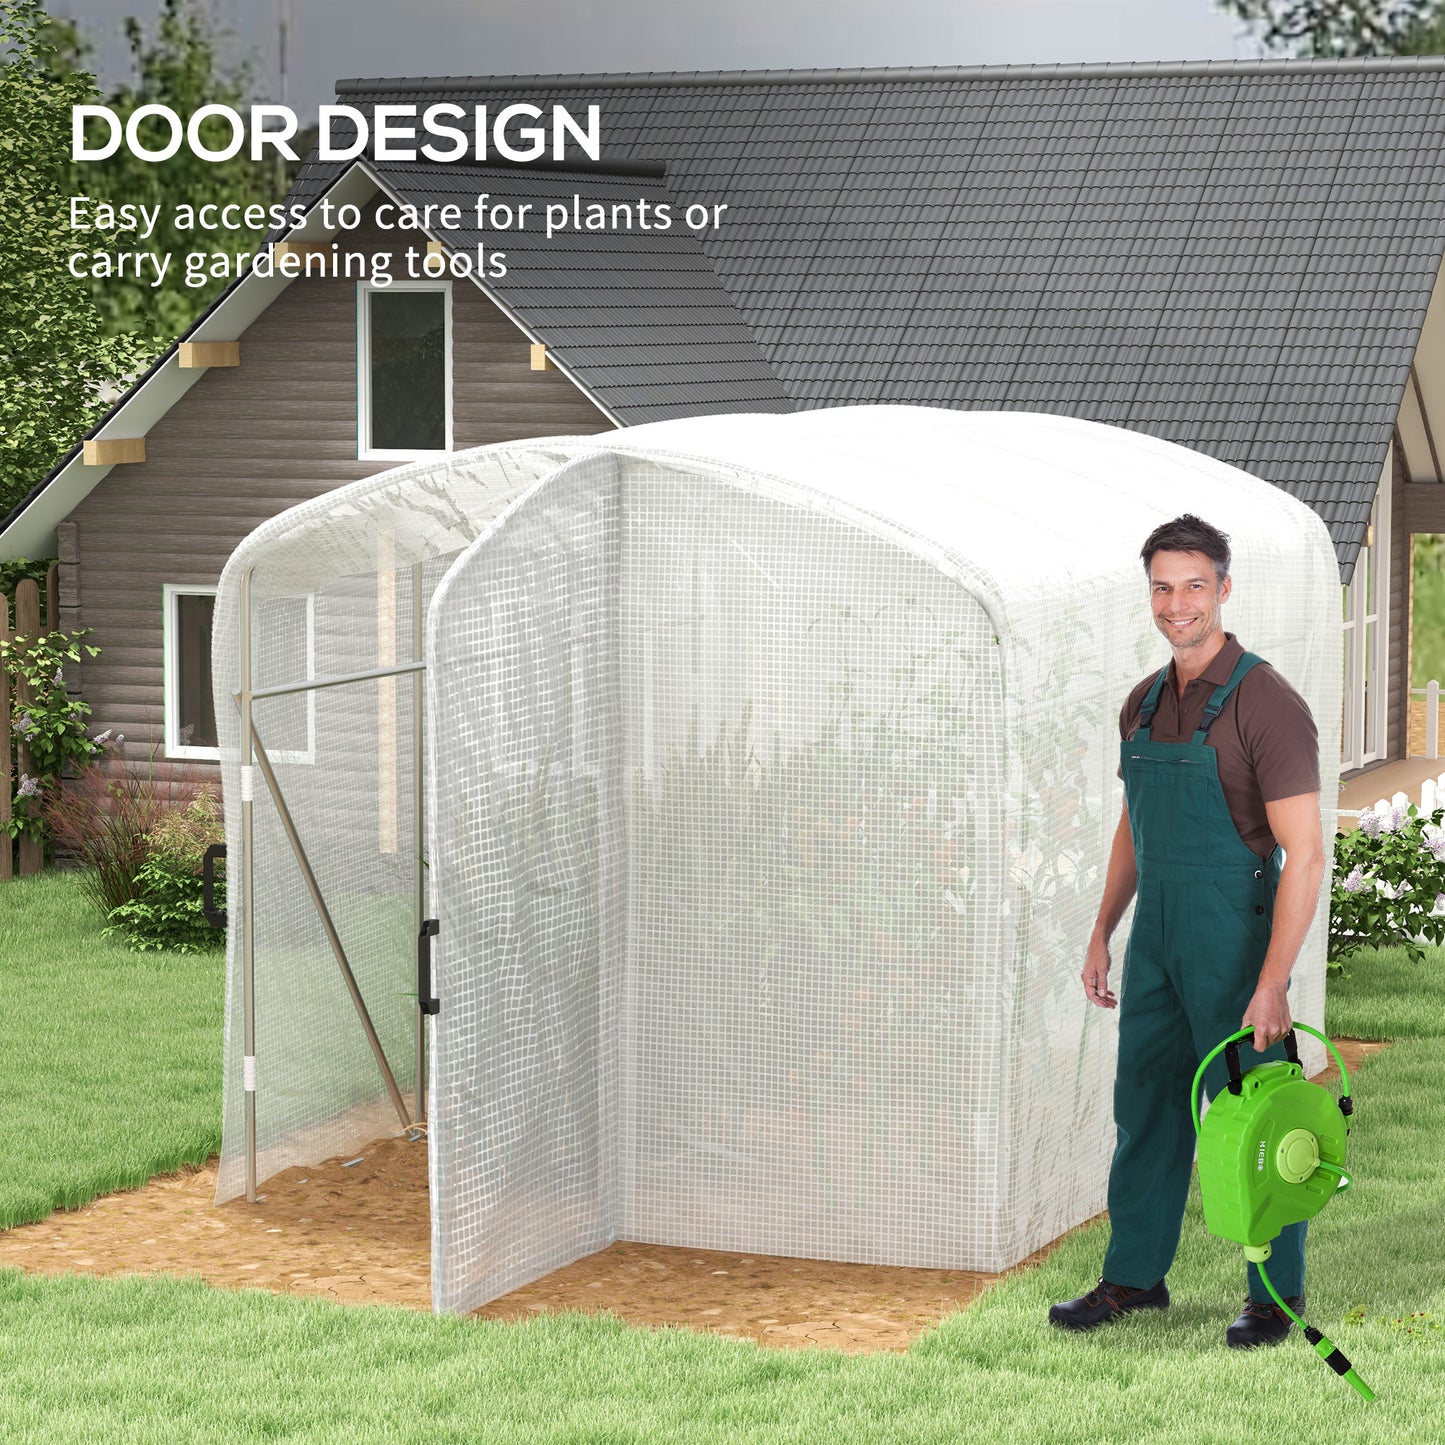 Outsunny Polytunnel Greenhouse Walk-in Grow House with UV-resistant PE Cover, Door and Galvanised Steel Frame, 2 x 2 x 2m, White